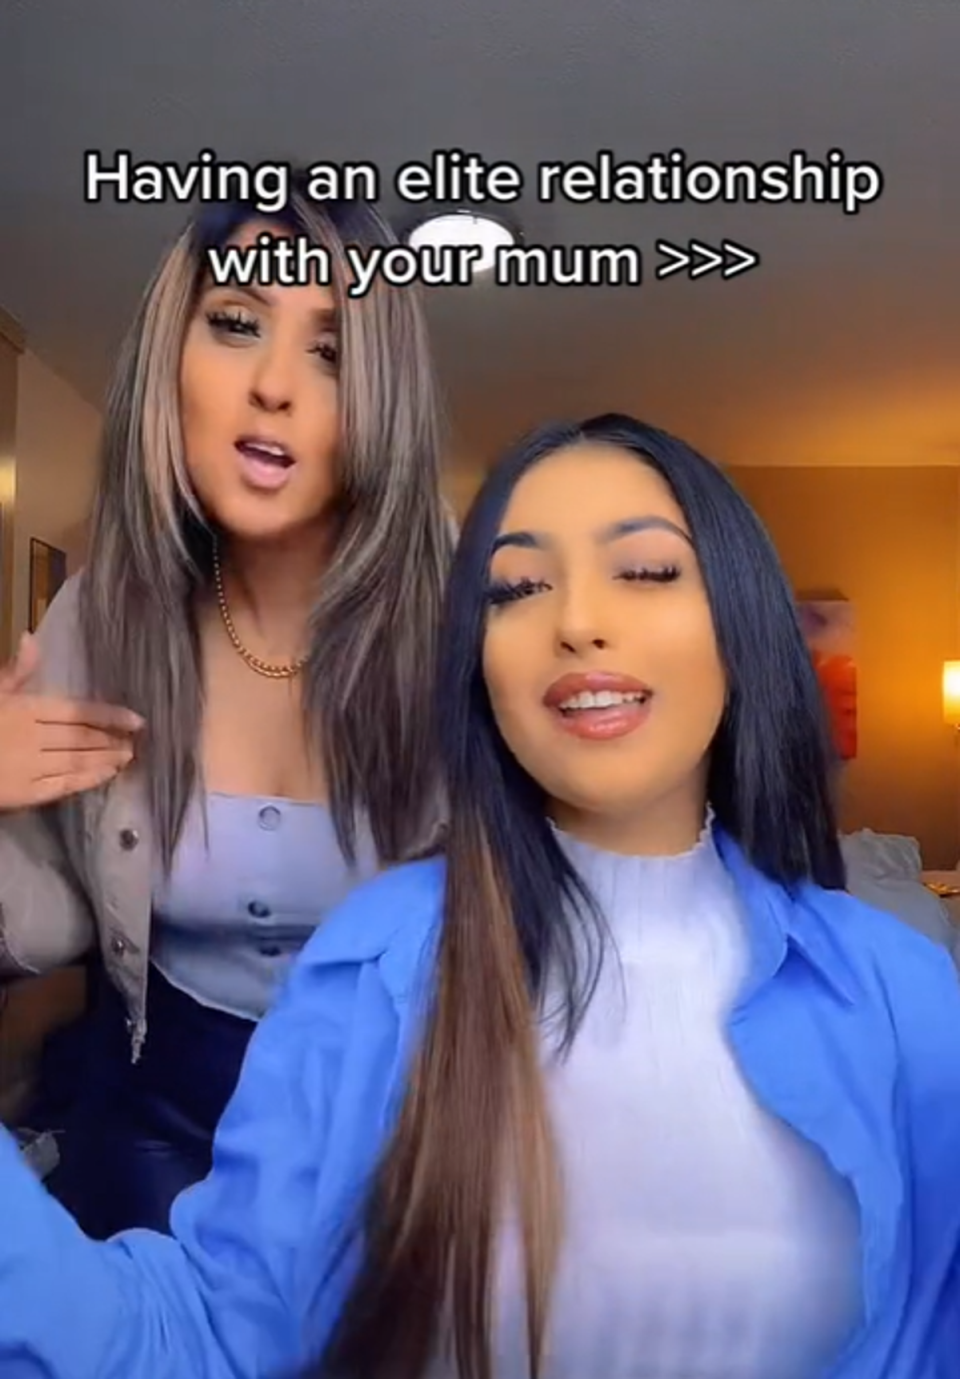 The two women pose for a video together on TikTok (Screengrab)